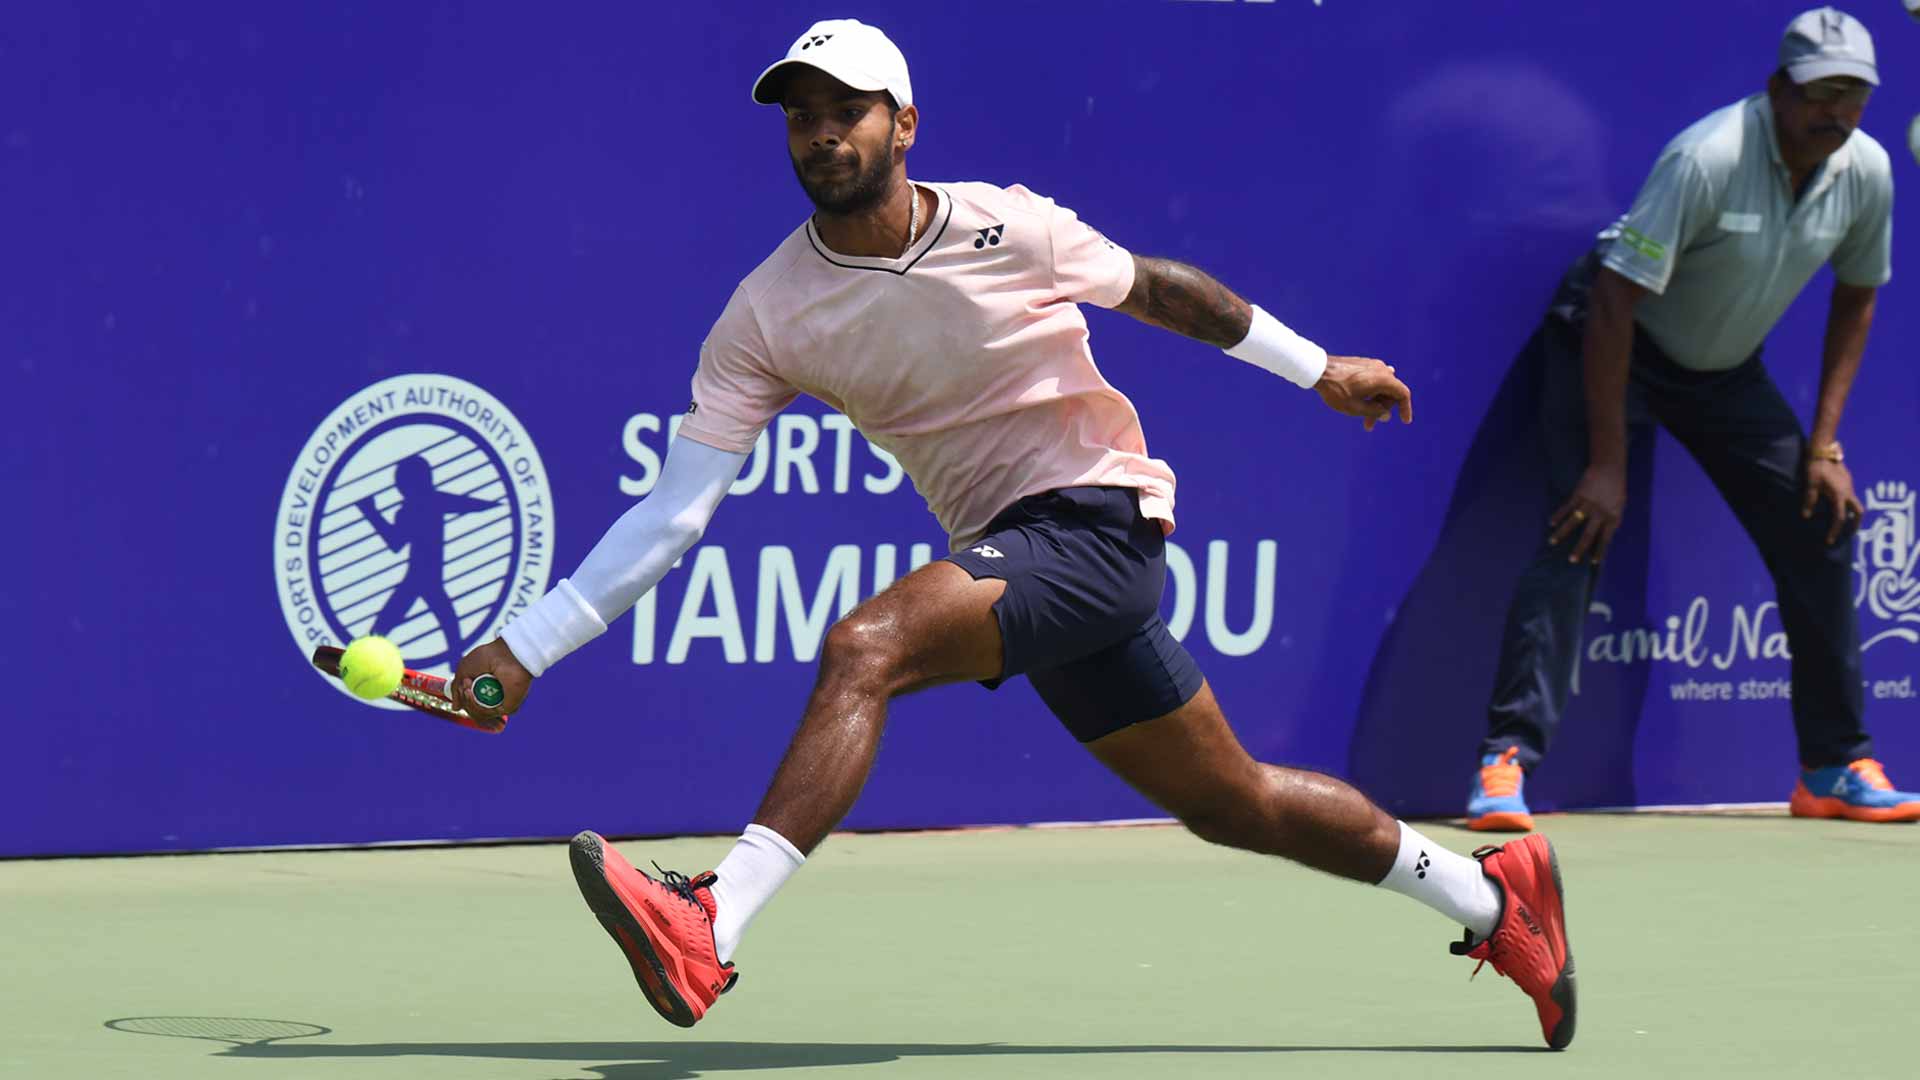 <a href='https://www.atptour.com/en/players/sumit-nagal/n897/overview'>Sumit Nagal</a> competes on home soil at the Chennai Challenger in February.